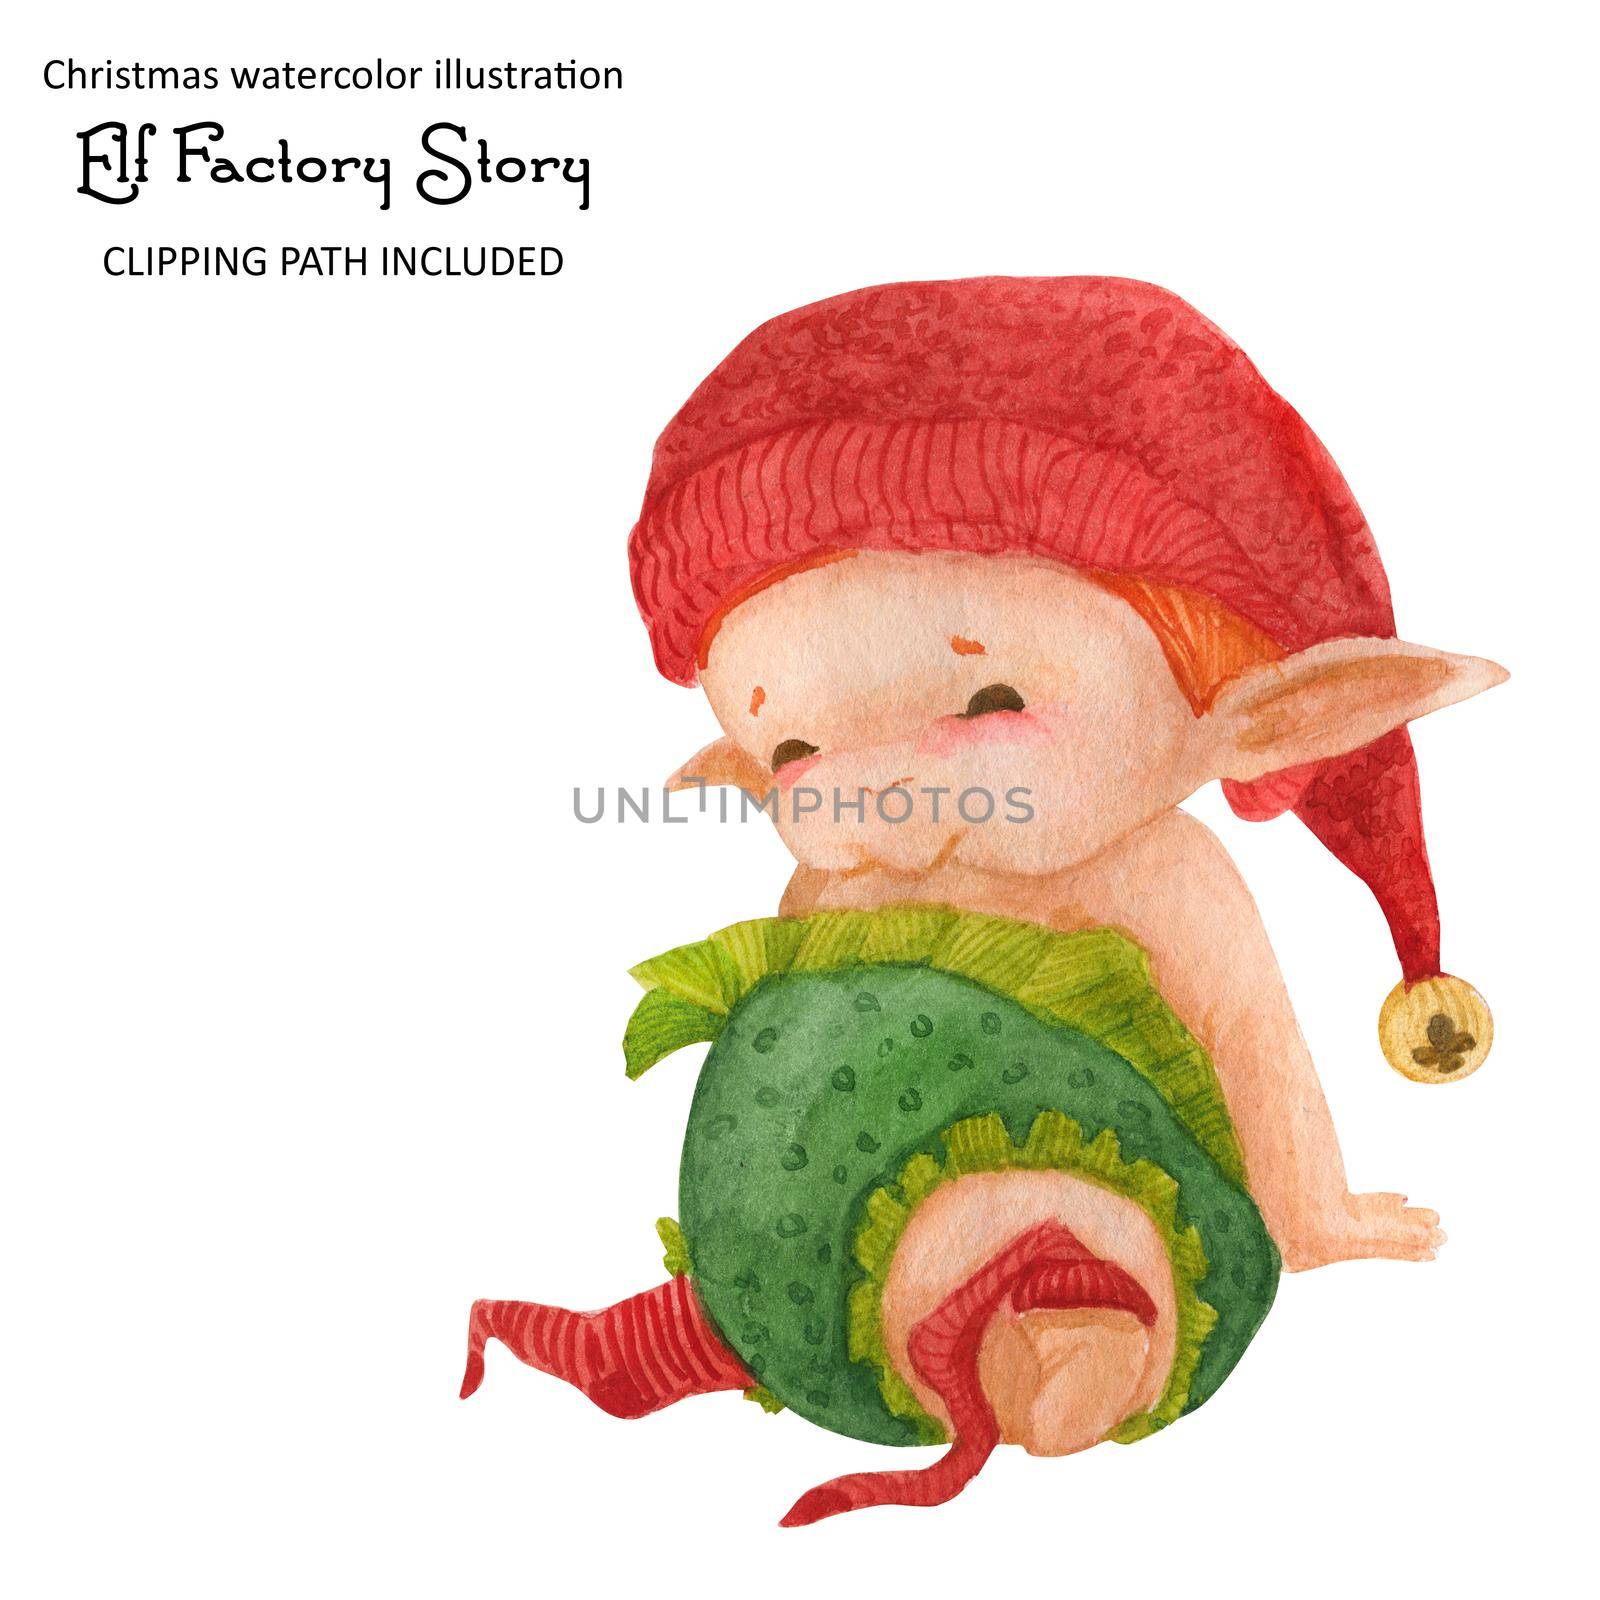 Christmas elf story, elf sweet baby, isolated watercolor and clipping path